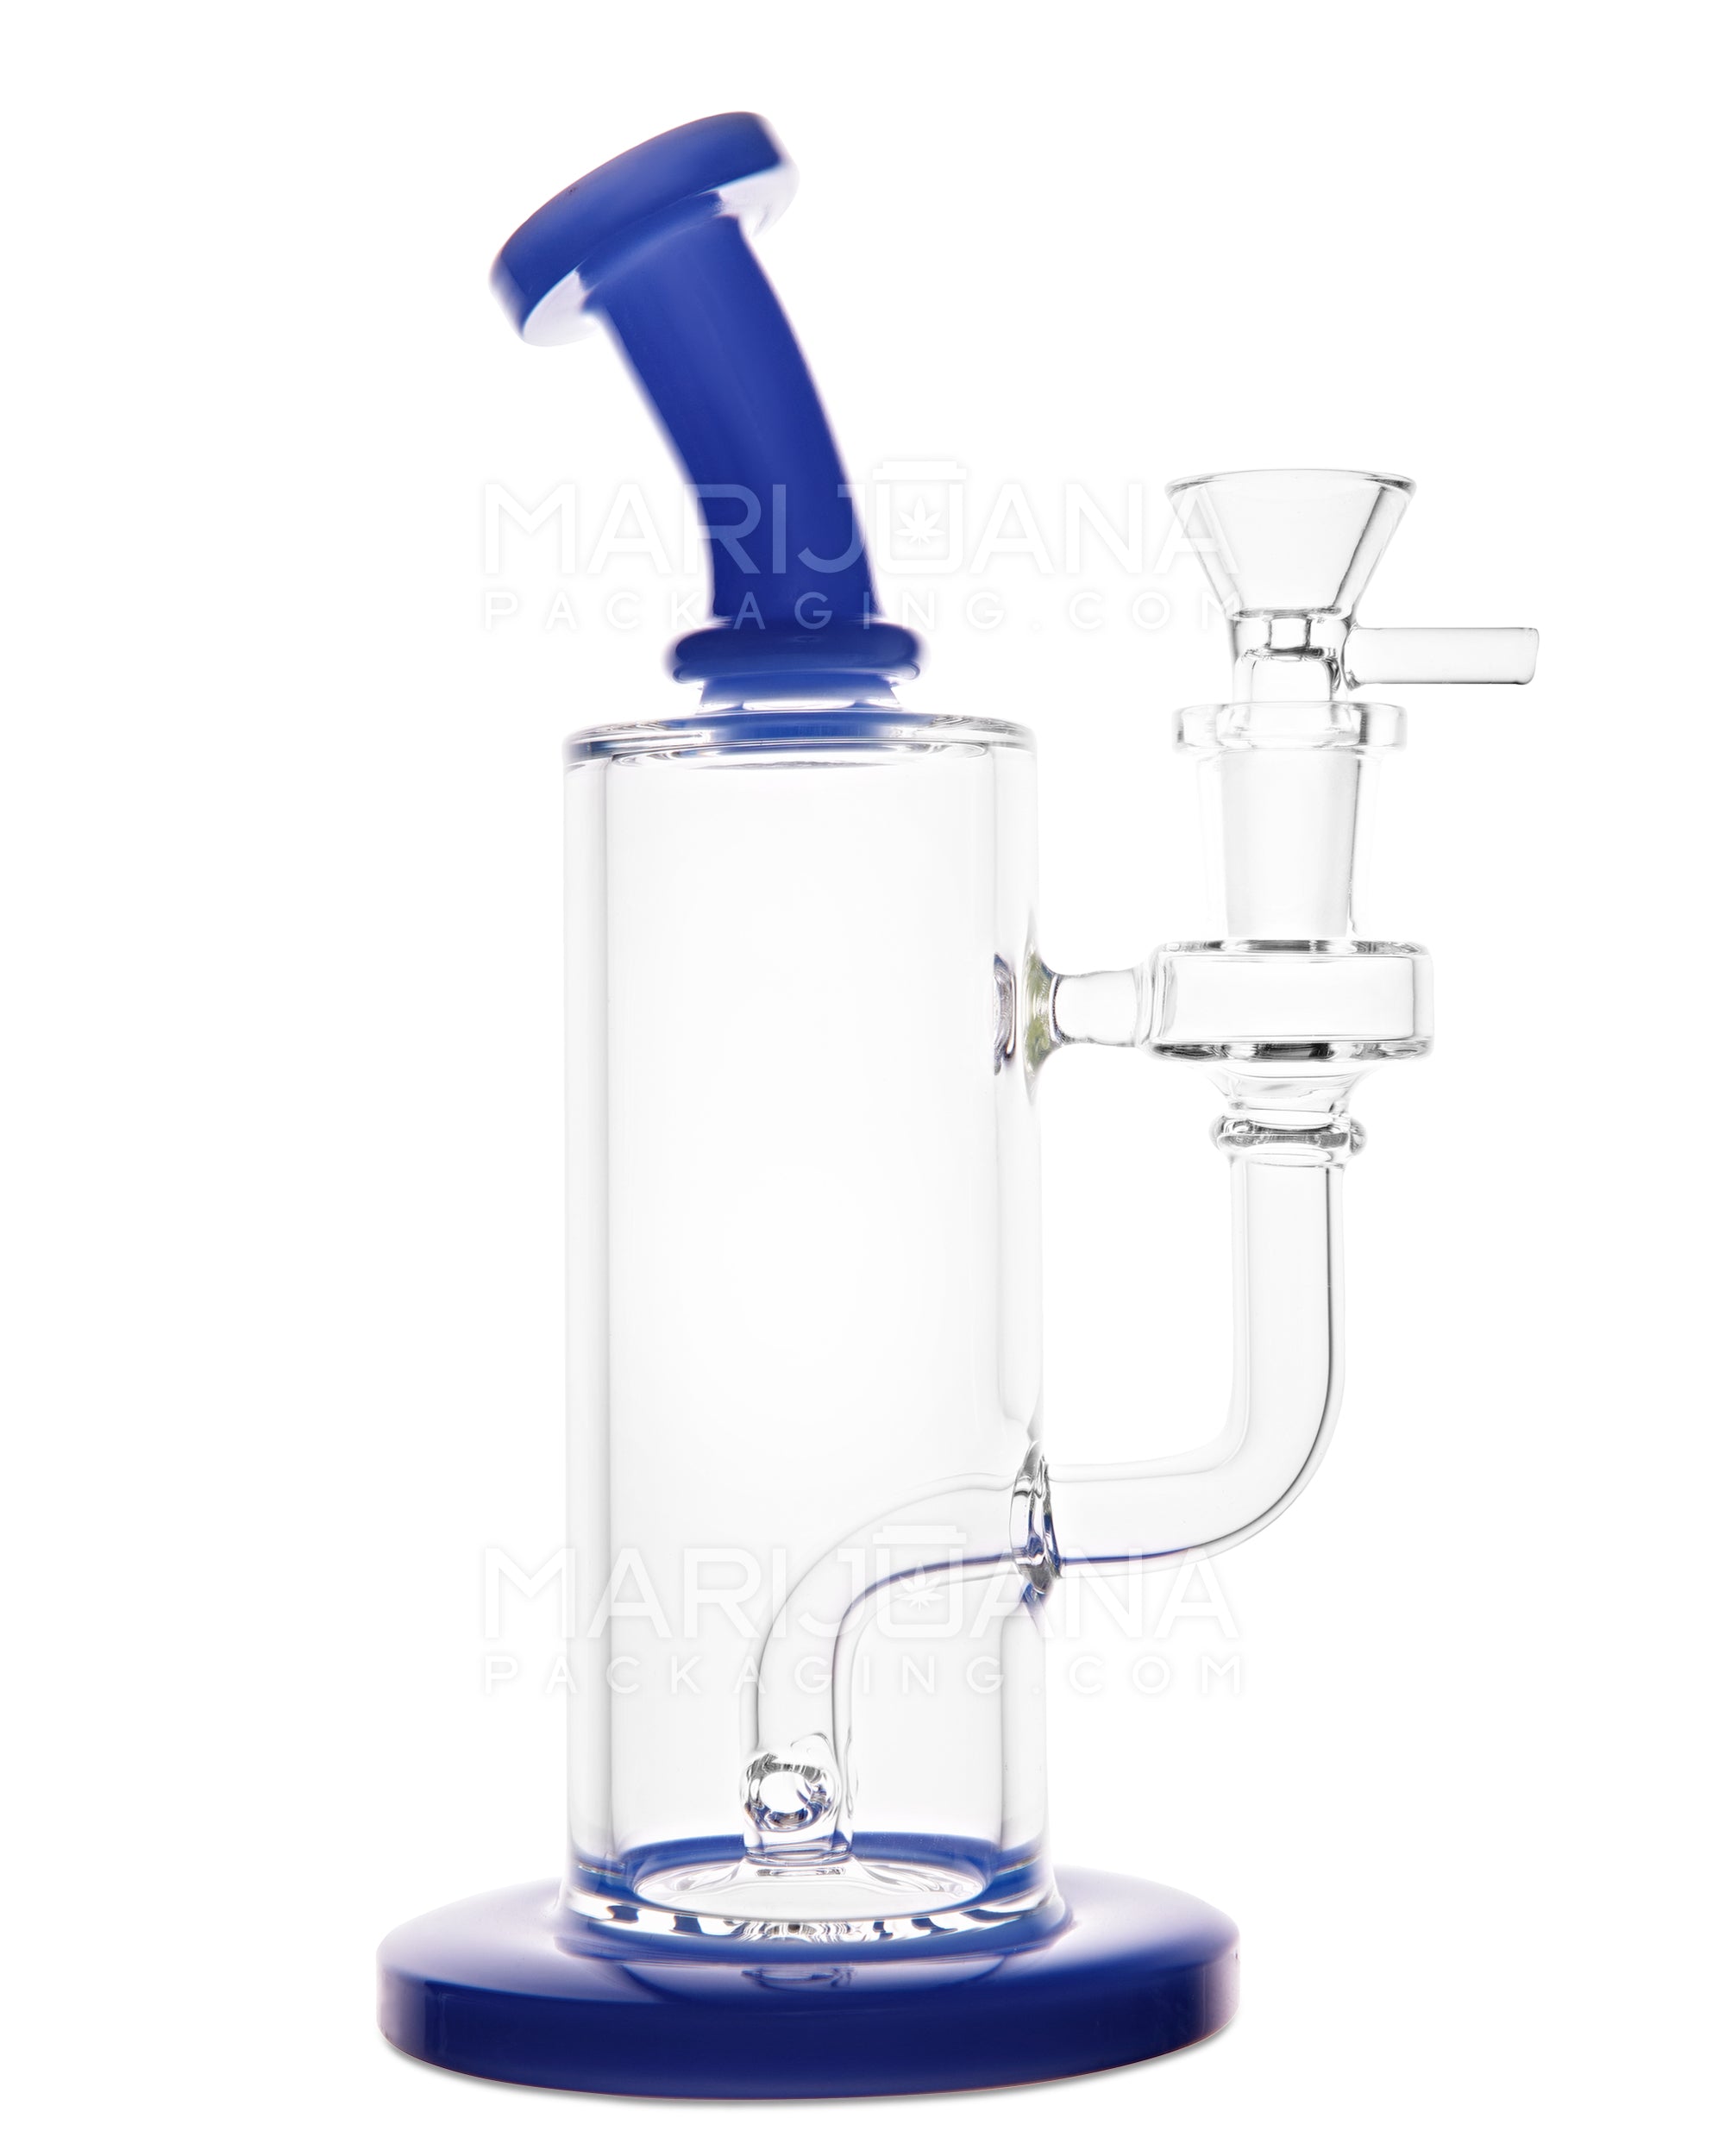 Bent Neck Two Hole Perc Glass Water Pipe w/ Thick Base | 8.5in Tall - 14mm Bowl - Blue - 1